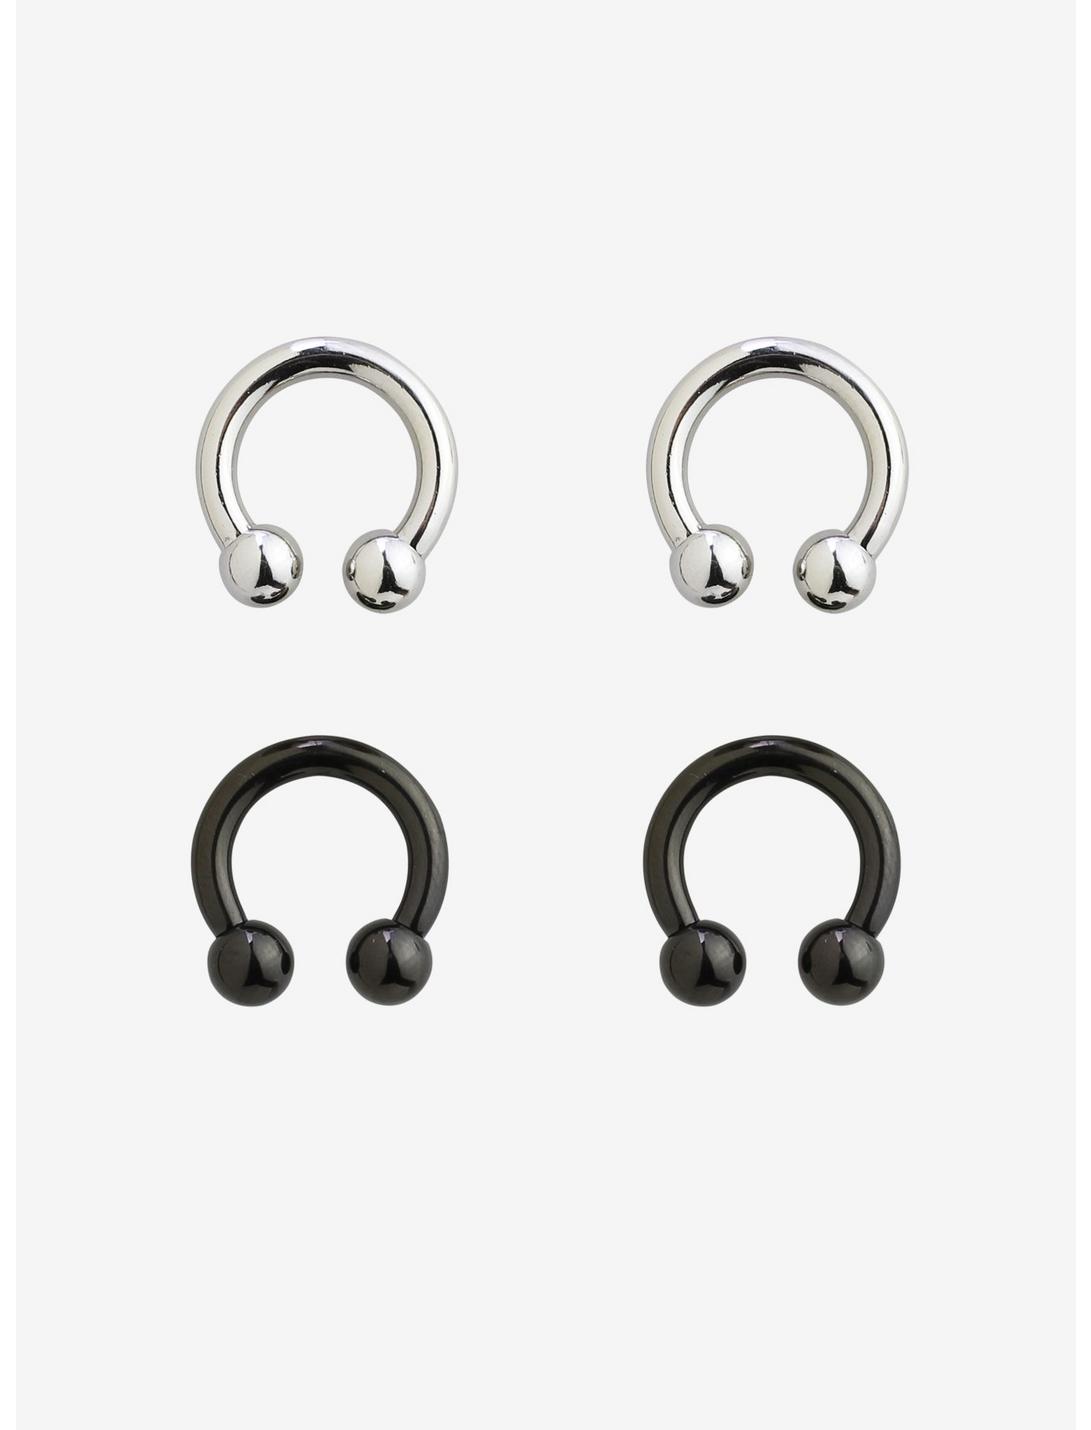 10G Steel Silver And Black Circular Barbell With Ball Ends 4 Pack, , hi-res